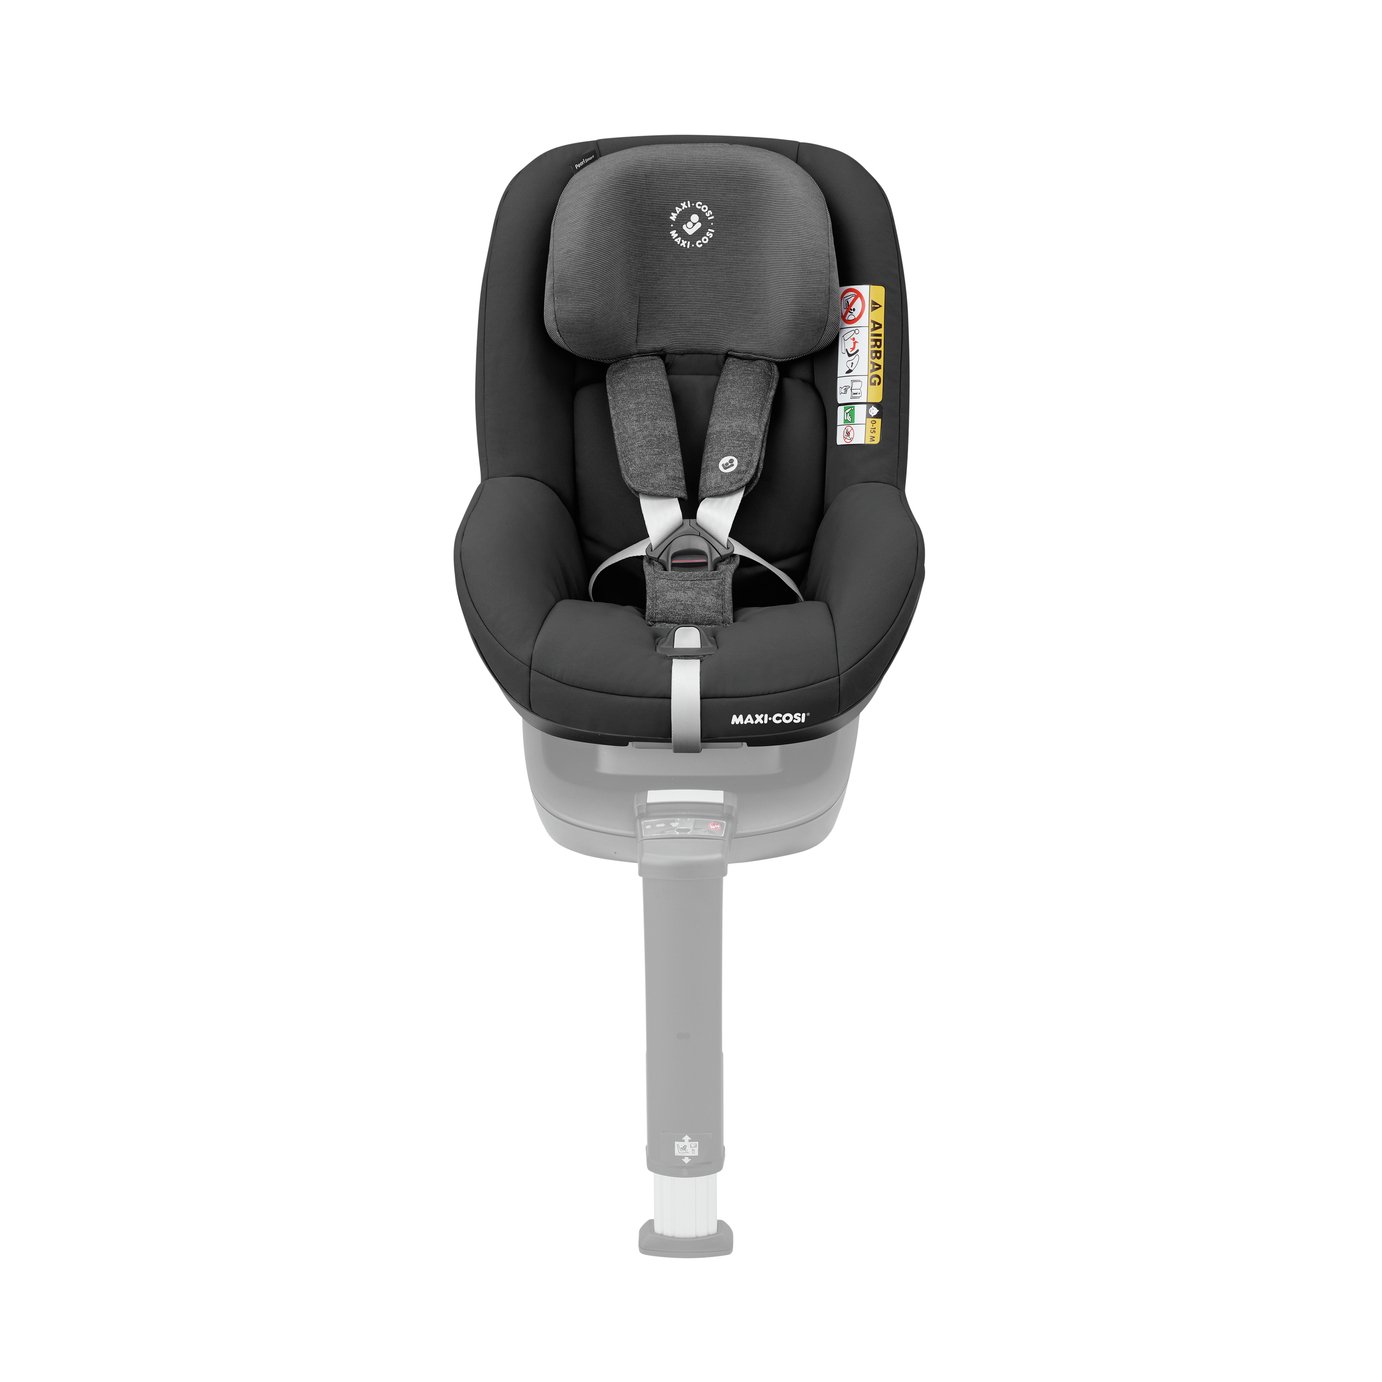 Maxi-Cosi Pearl Smart i-Size Car Seat Review